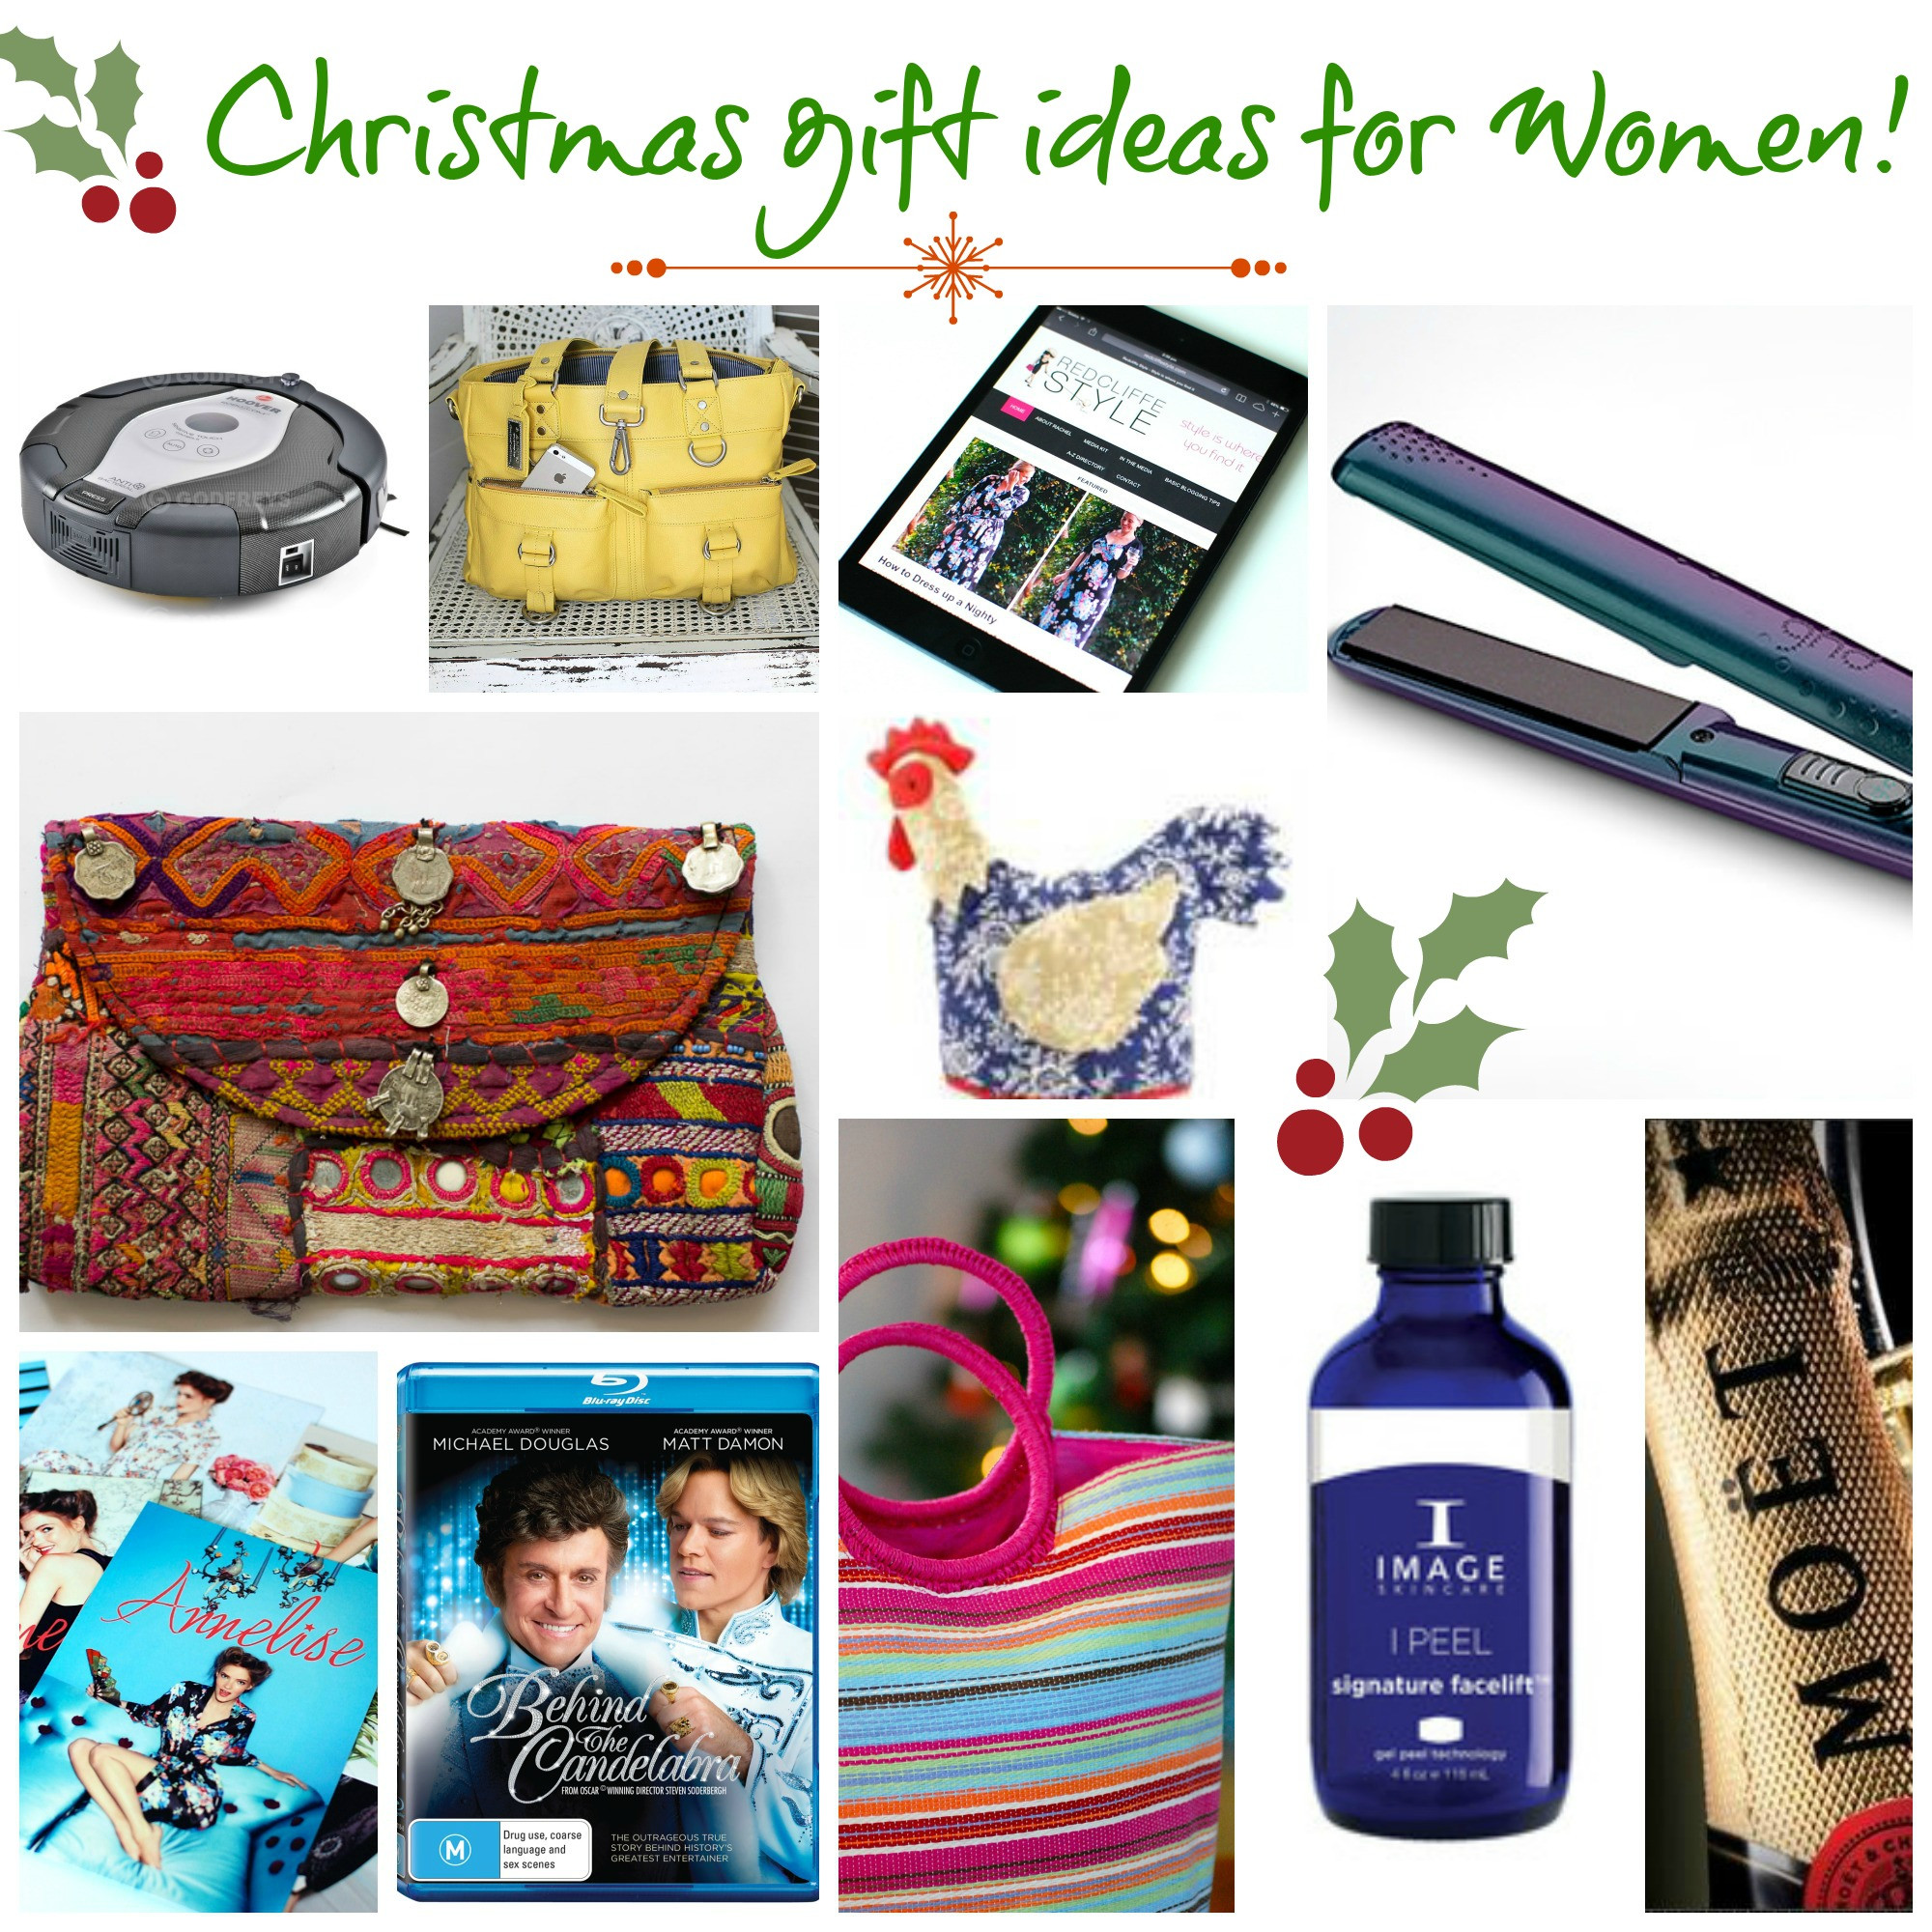 Holiday Gift Ideas For Women
 11 Christmas Gift ideas for women who have everything